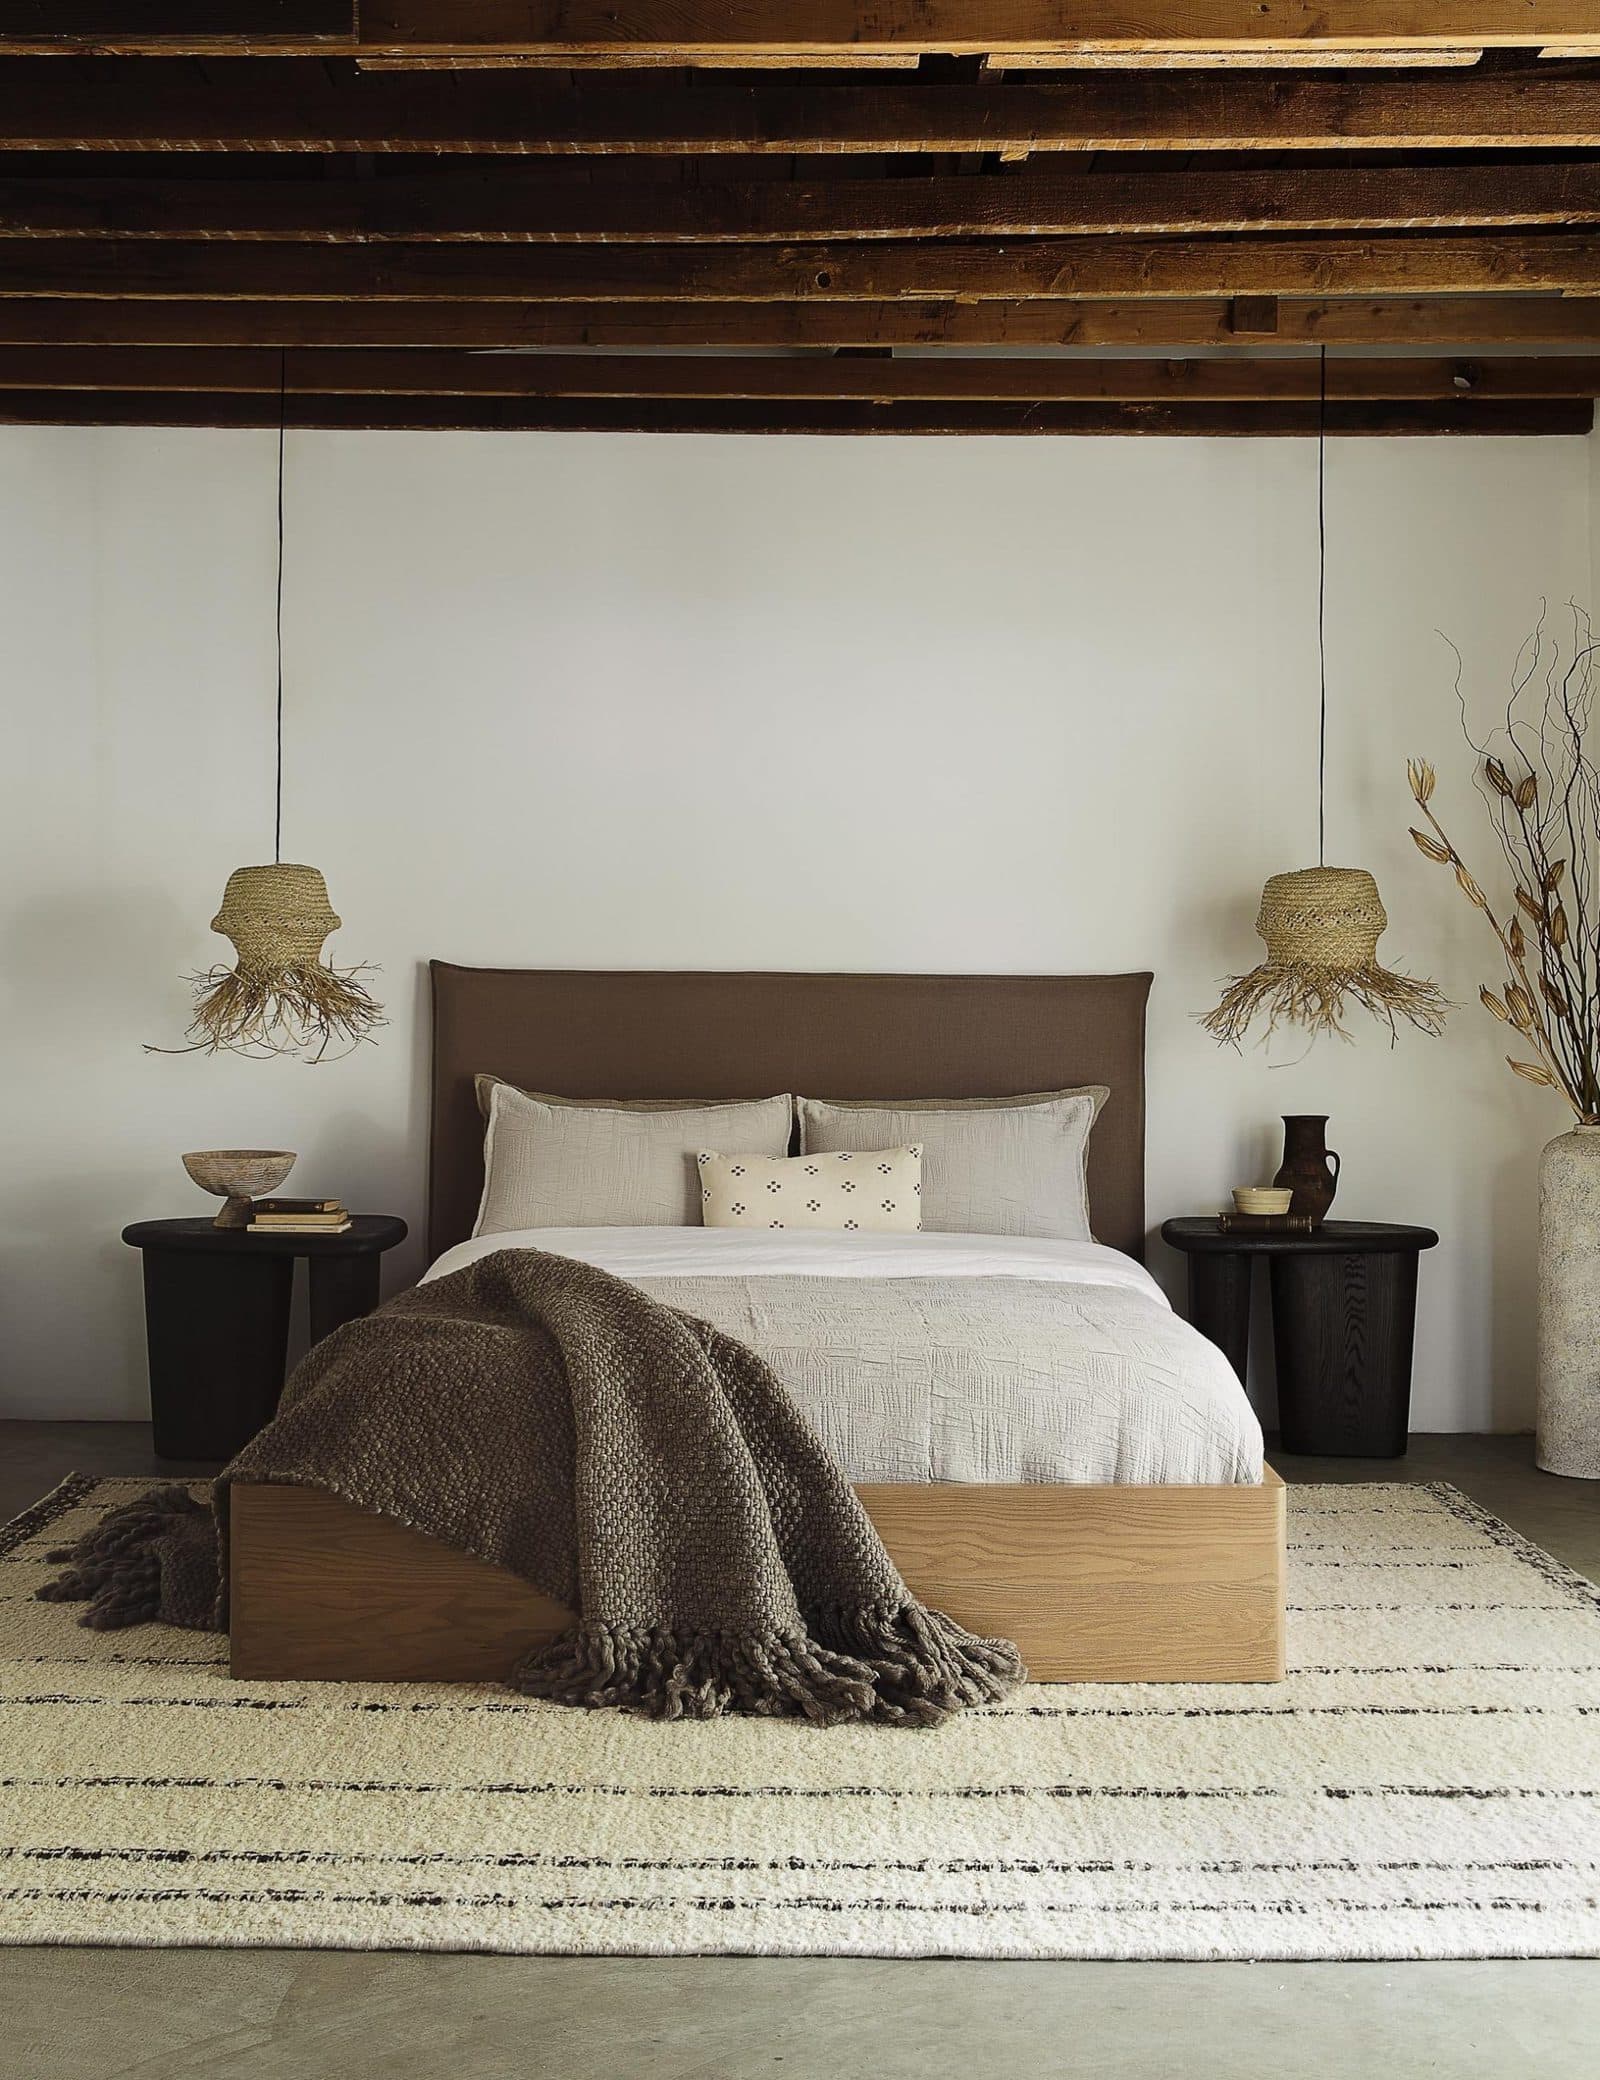 Turn Up the Warmth with a Two-Toned Bed